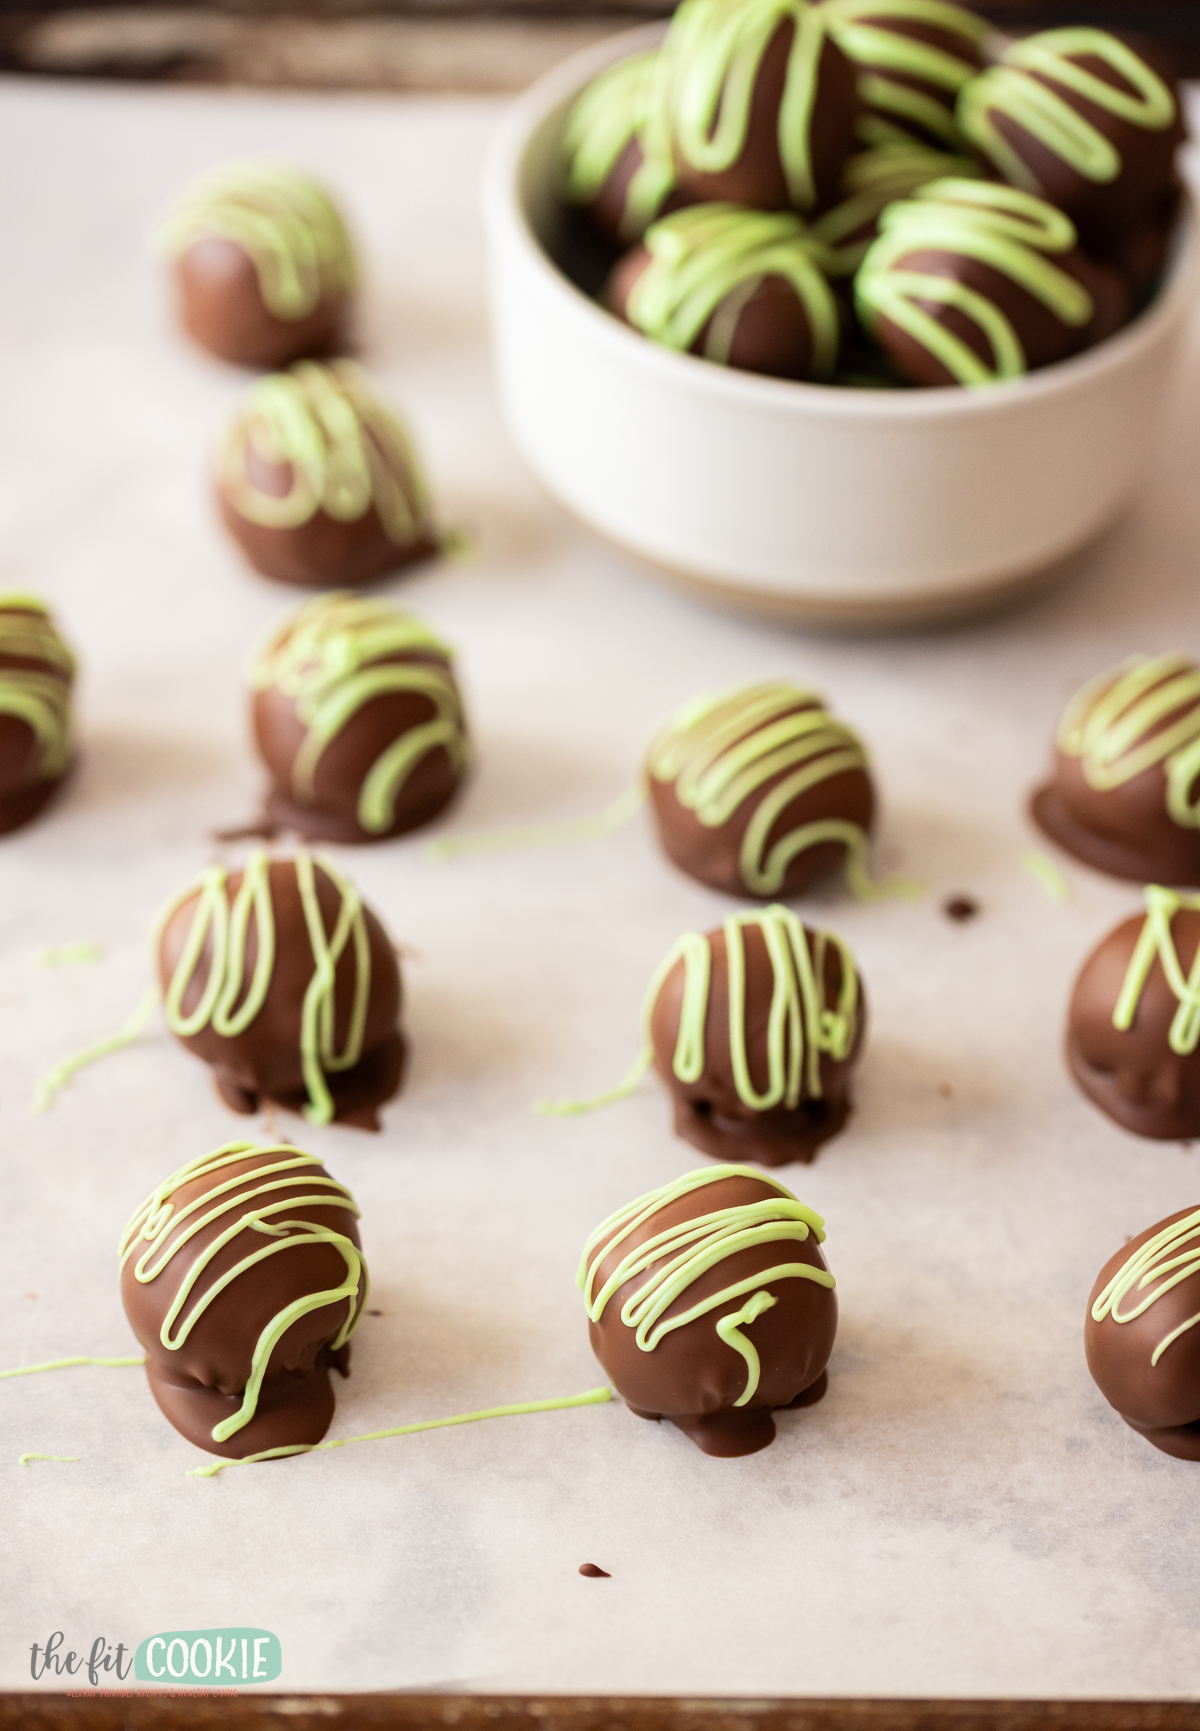 Mint Chocolate cookie truffles with green mint chocolate on a baking sheet.